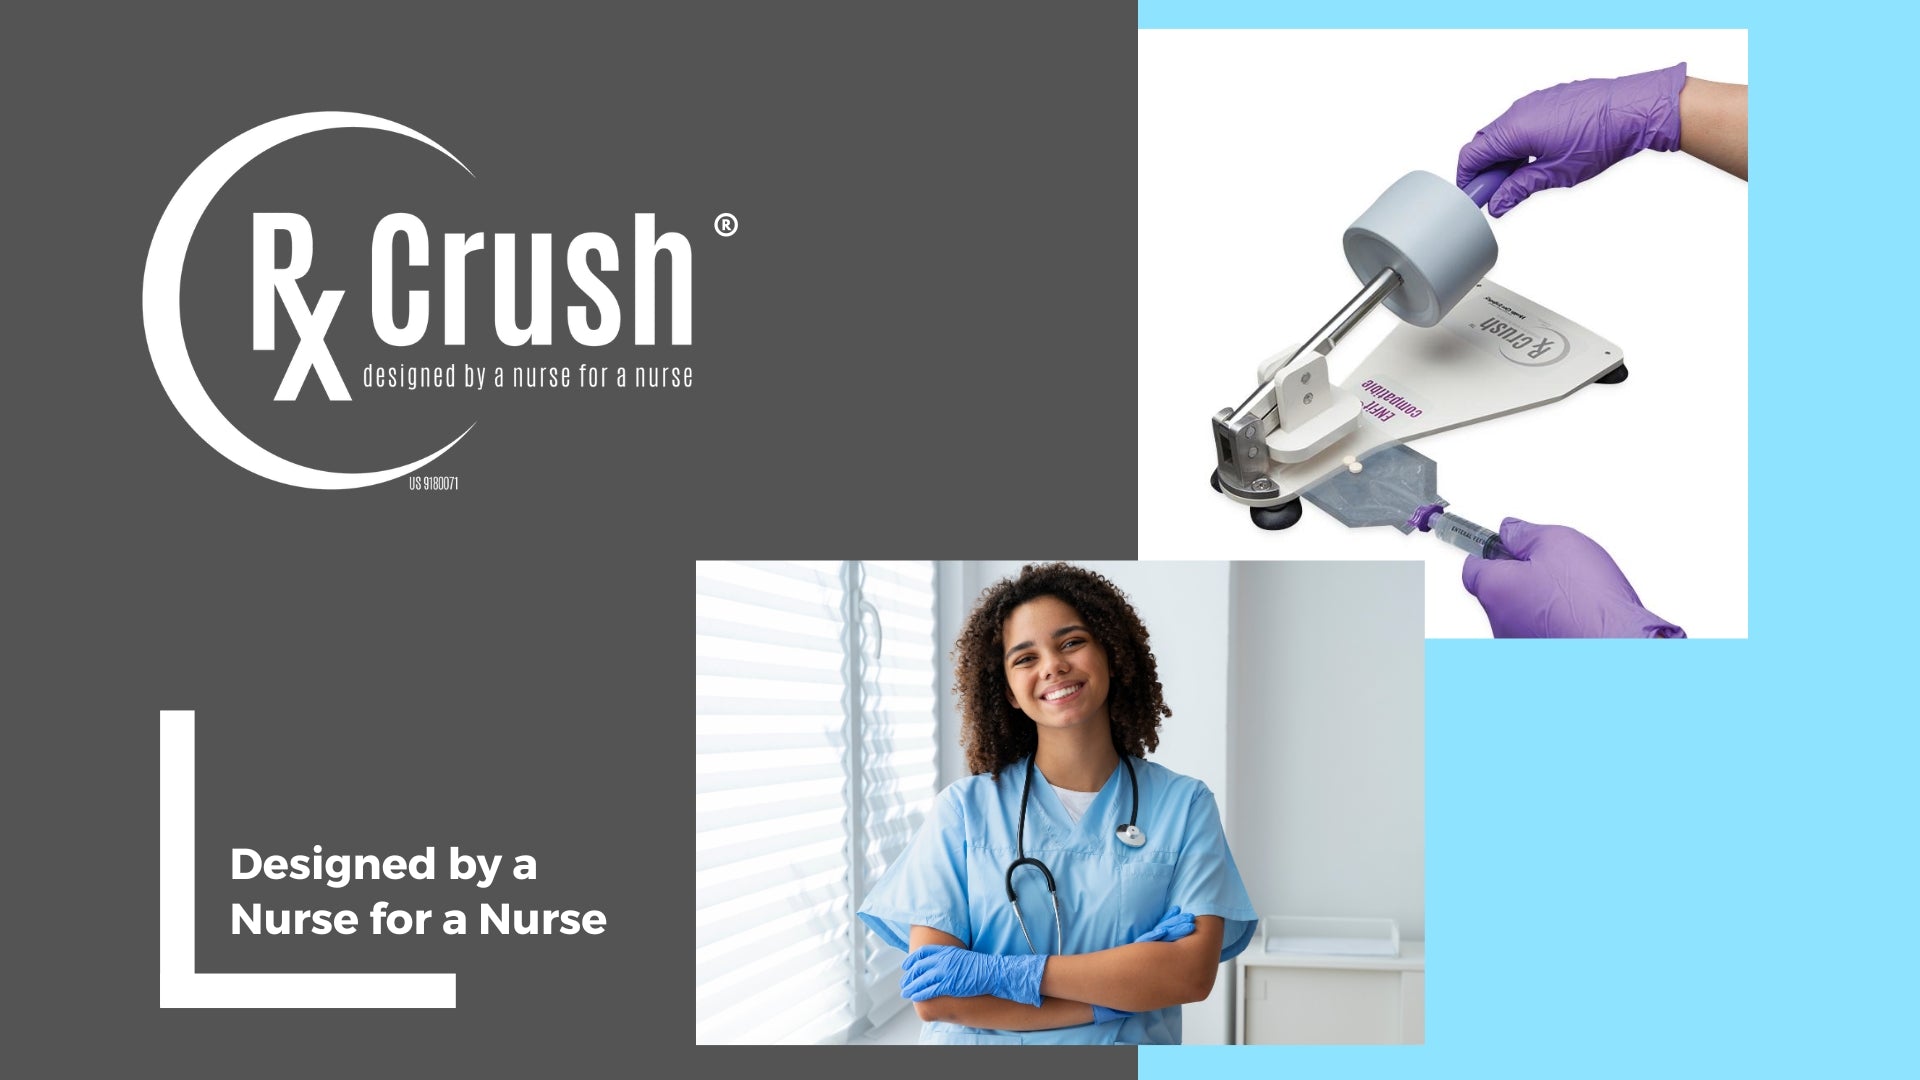 Load video: Comparison of the speed of the RxCrush PIll Crushing System versus other leading crushers.